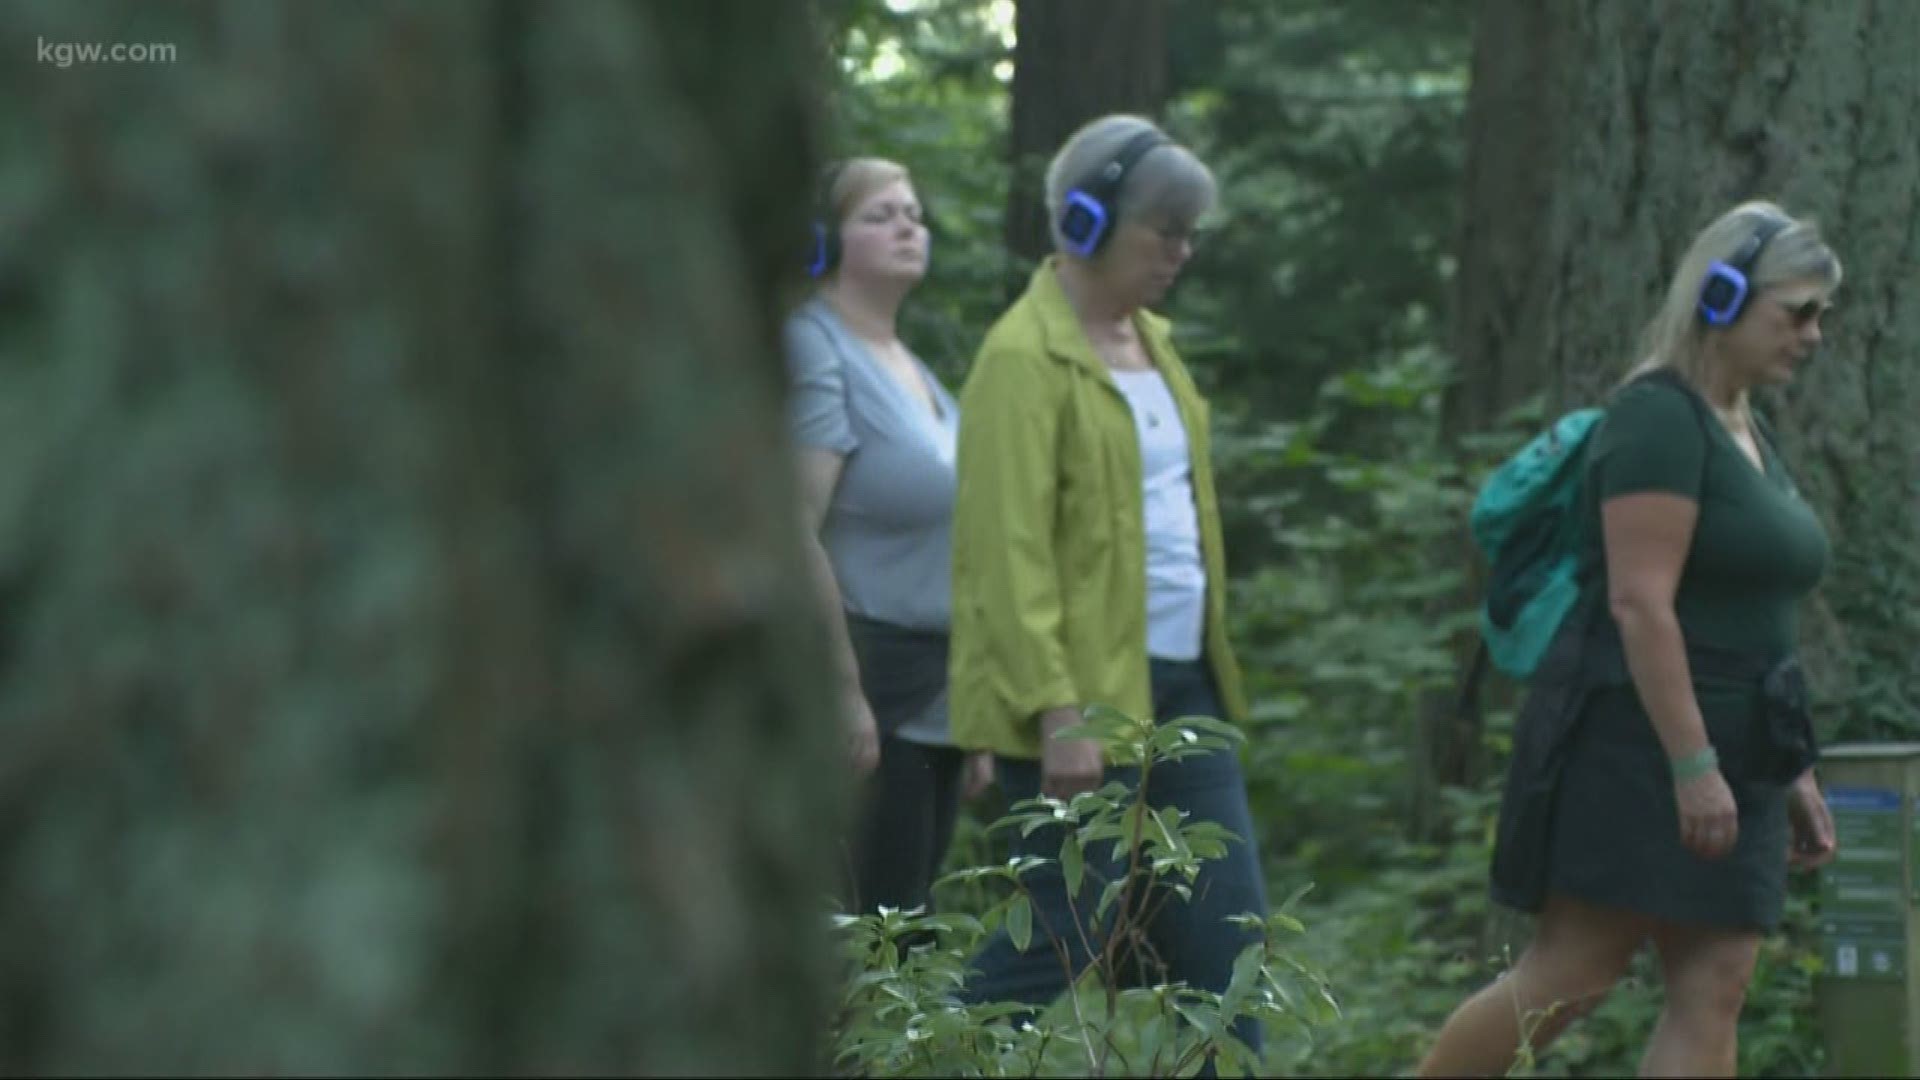 Meditative hike helps people come together while maintaining space